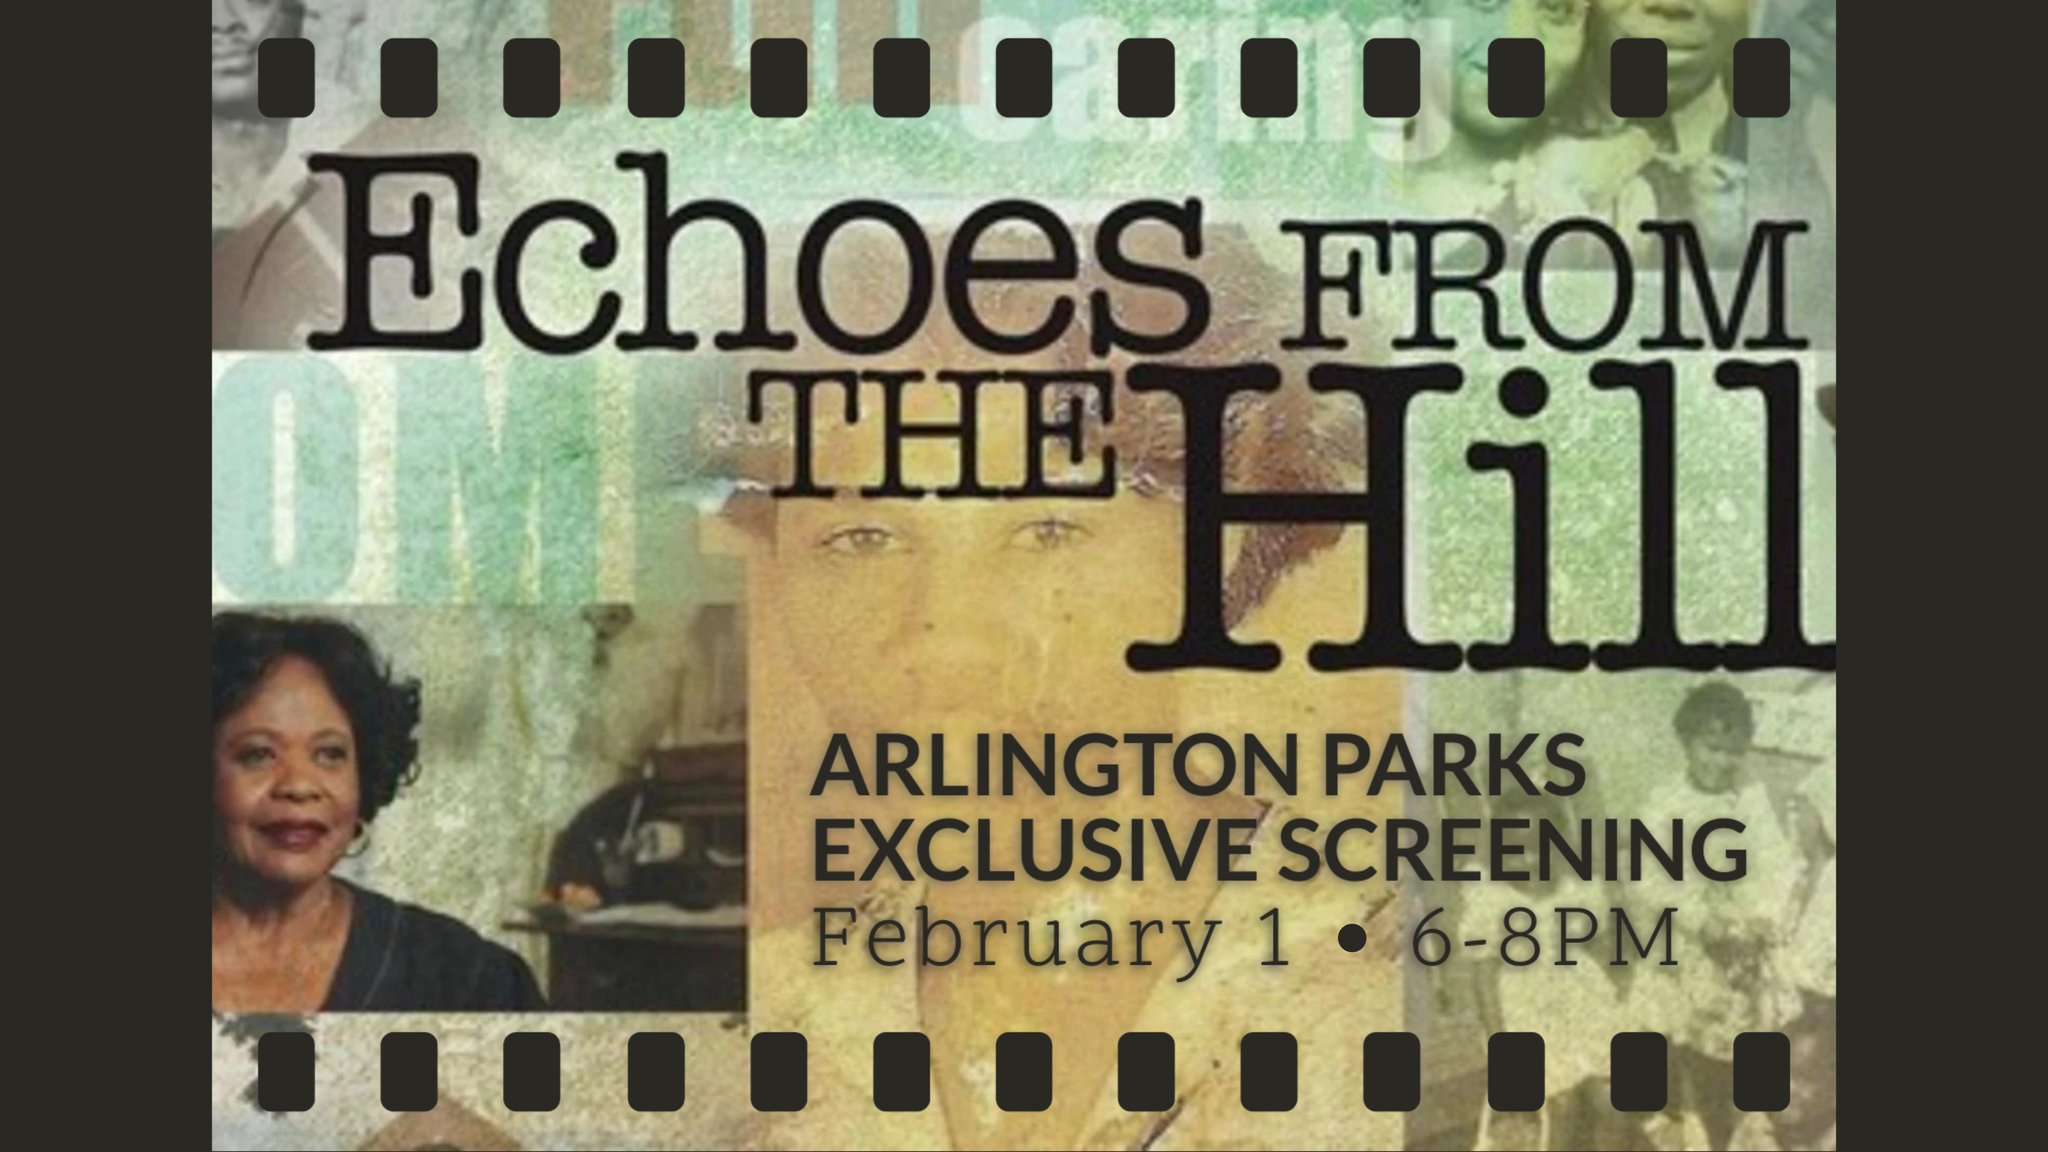 Exclusive Screening of Echoes From the Hill